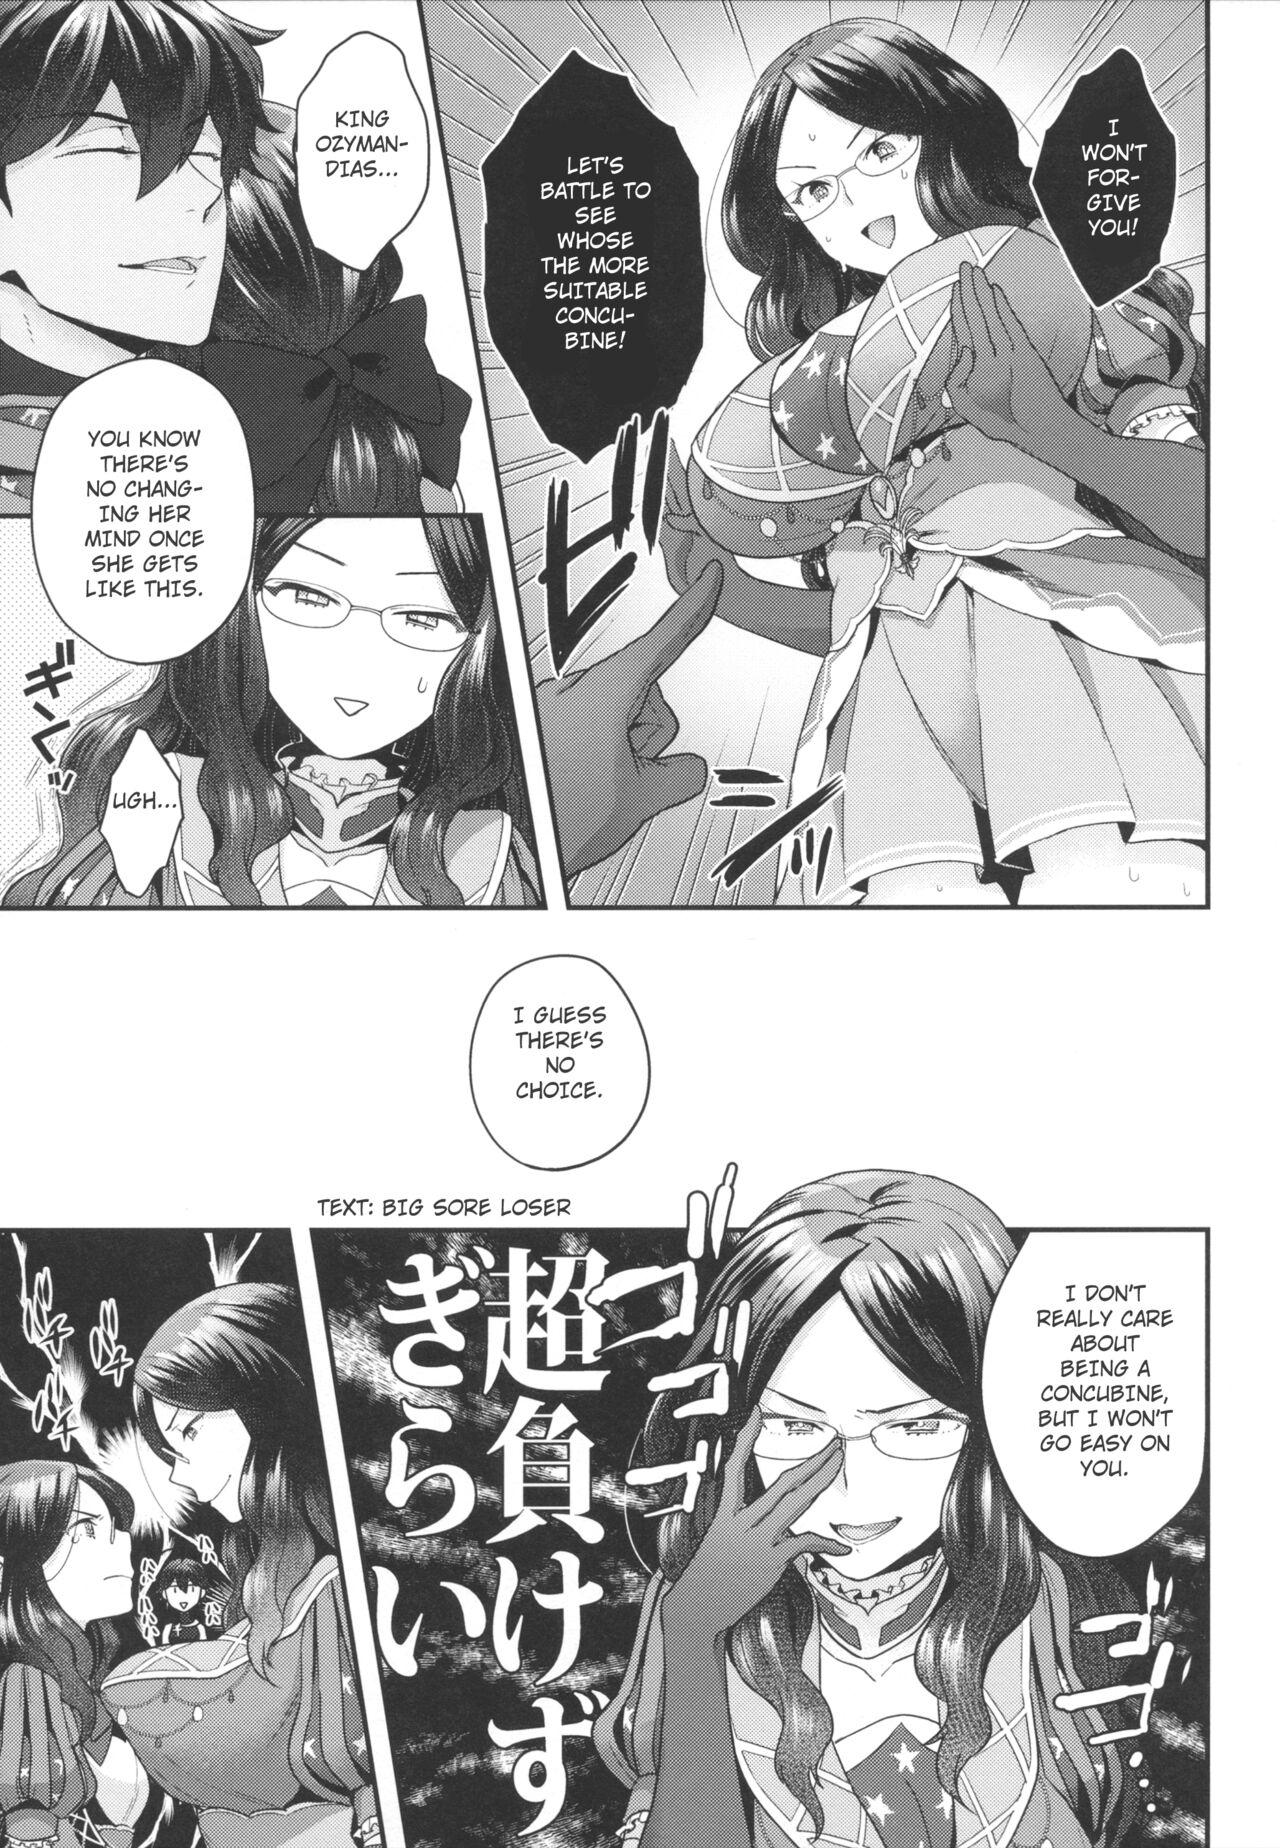 Transex OJY1DVI2 - Fate grand order Piercings - Page 6